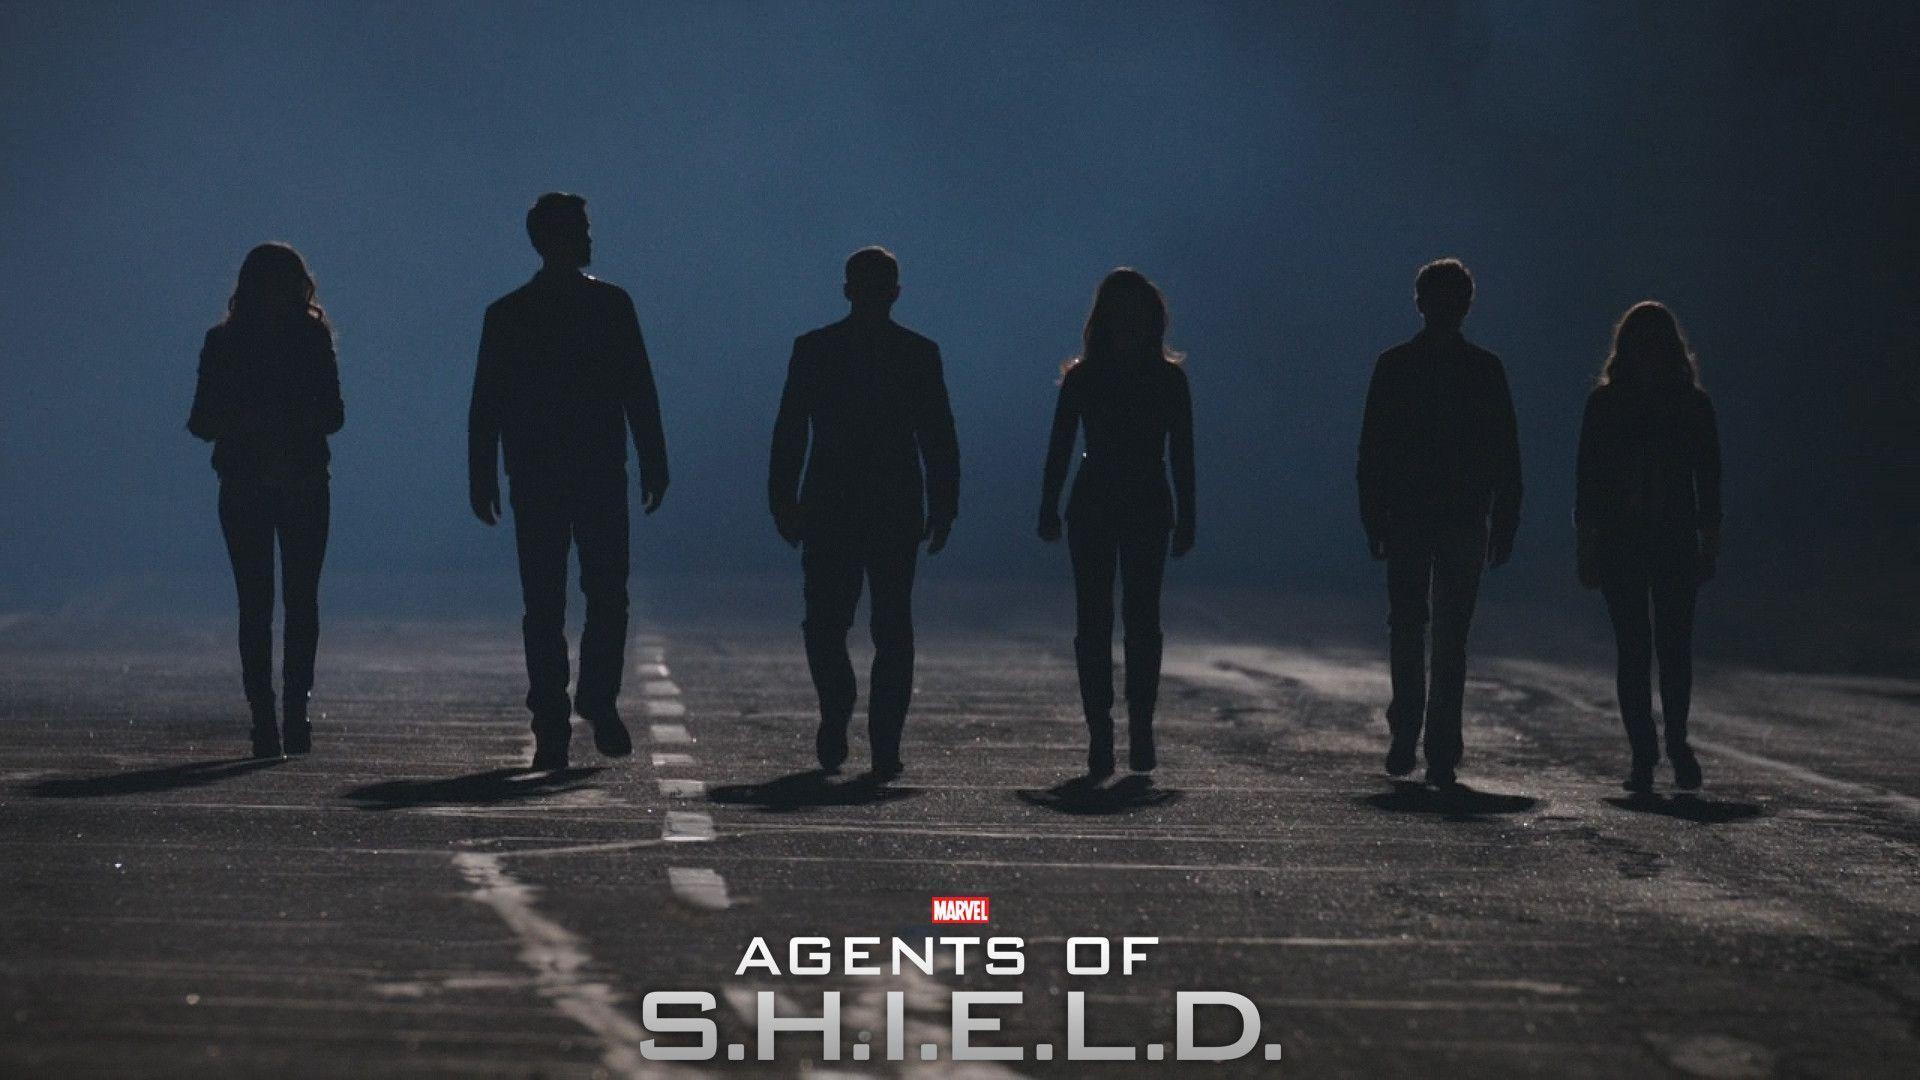 Agents of S.H.I.E.L.D. Wallpaper High Resolution and Quality Download